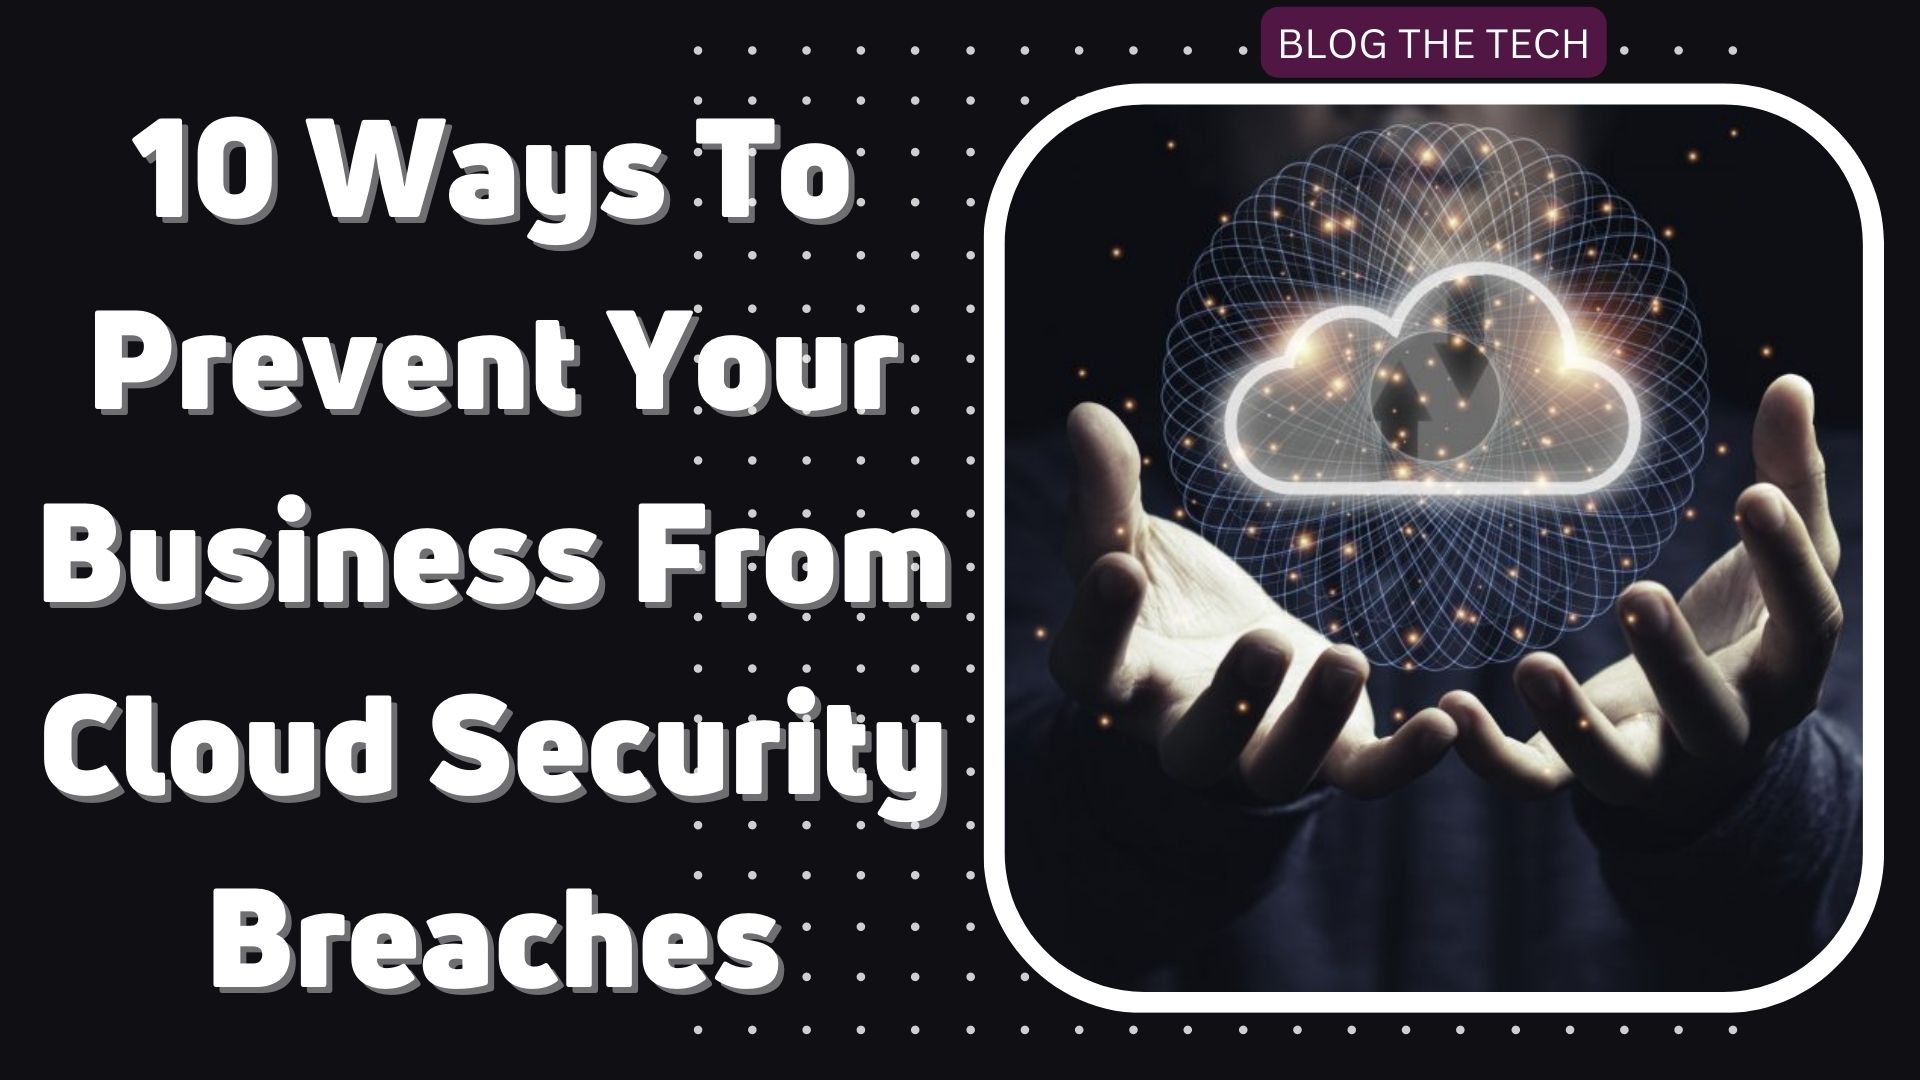 10 Ways To Prevent Your Business From Cloud Security Breaches